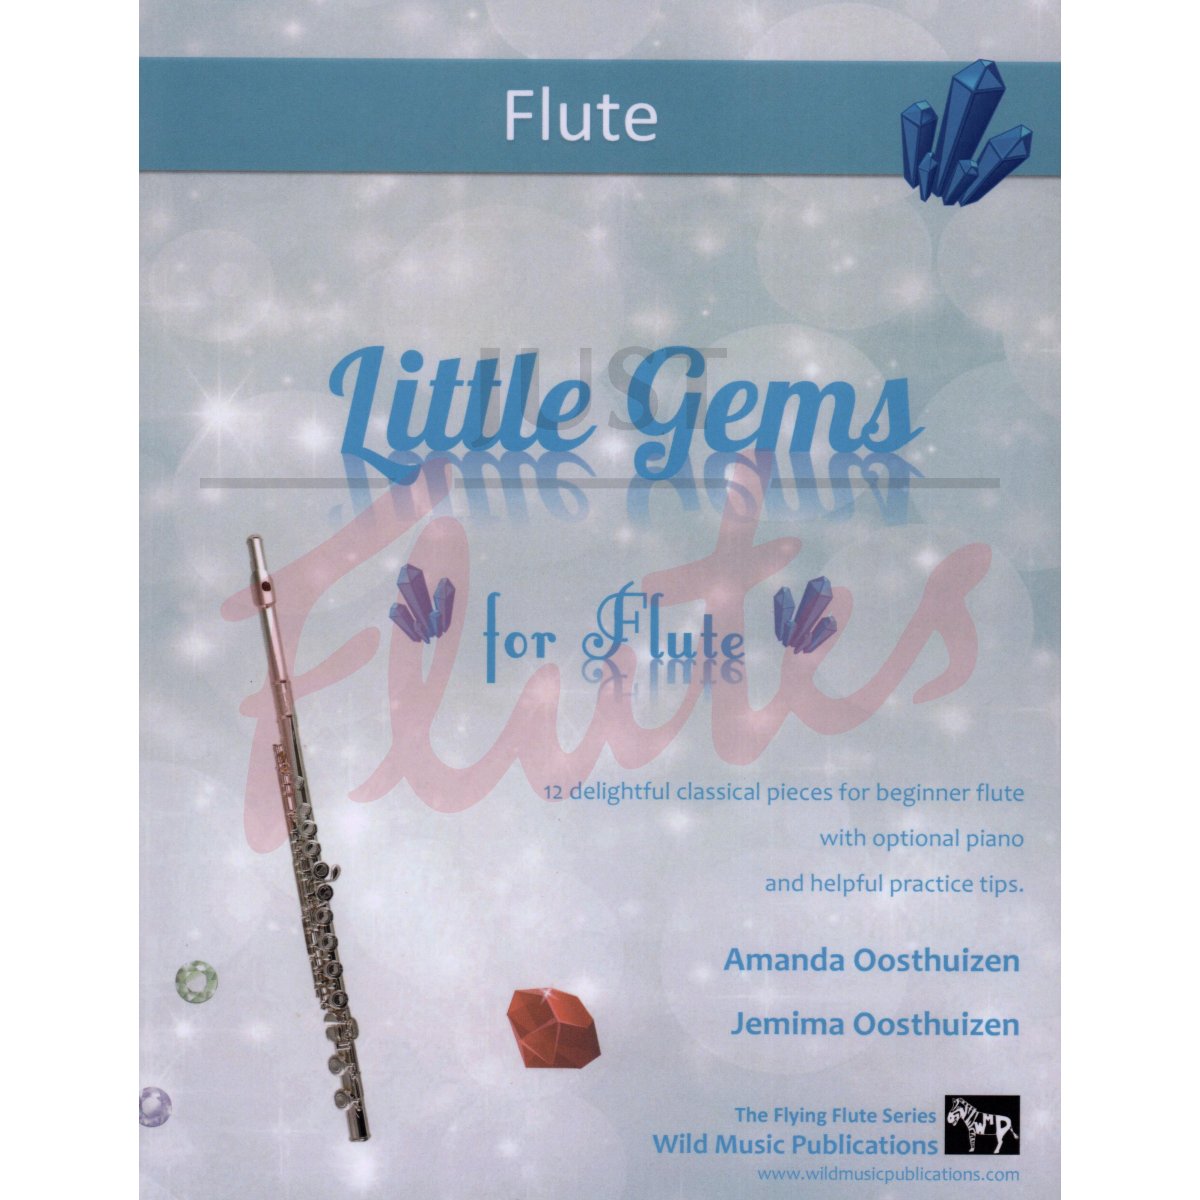 Little Gems for Flute and Piano